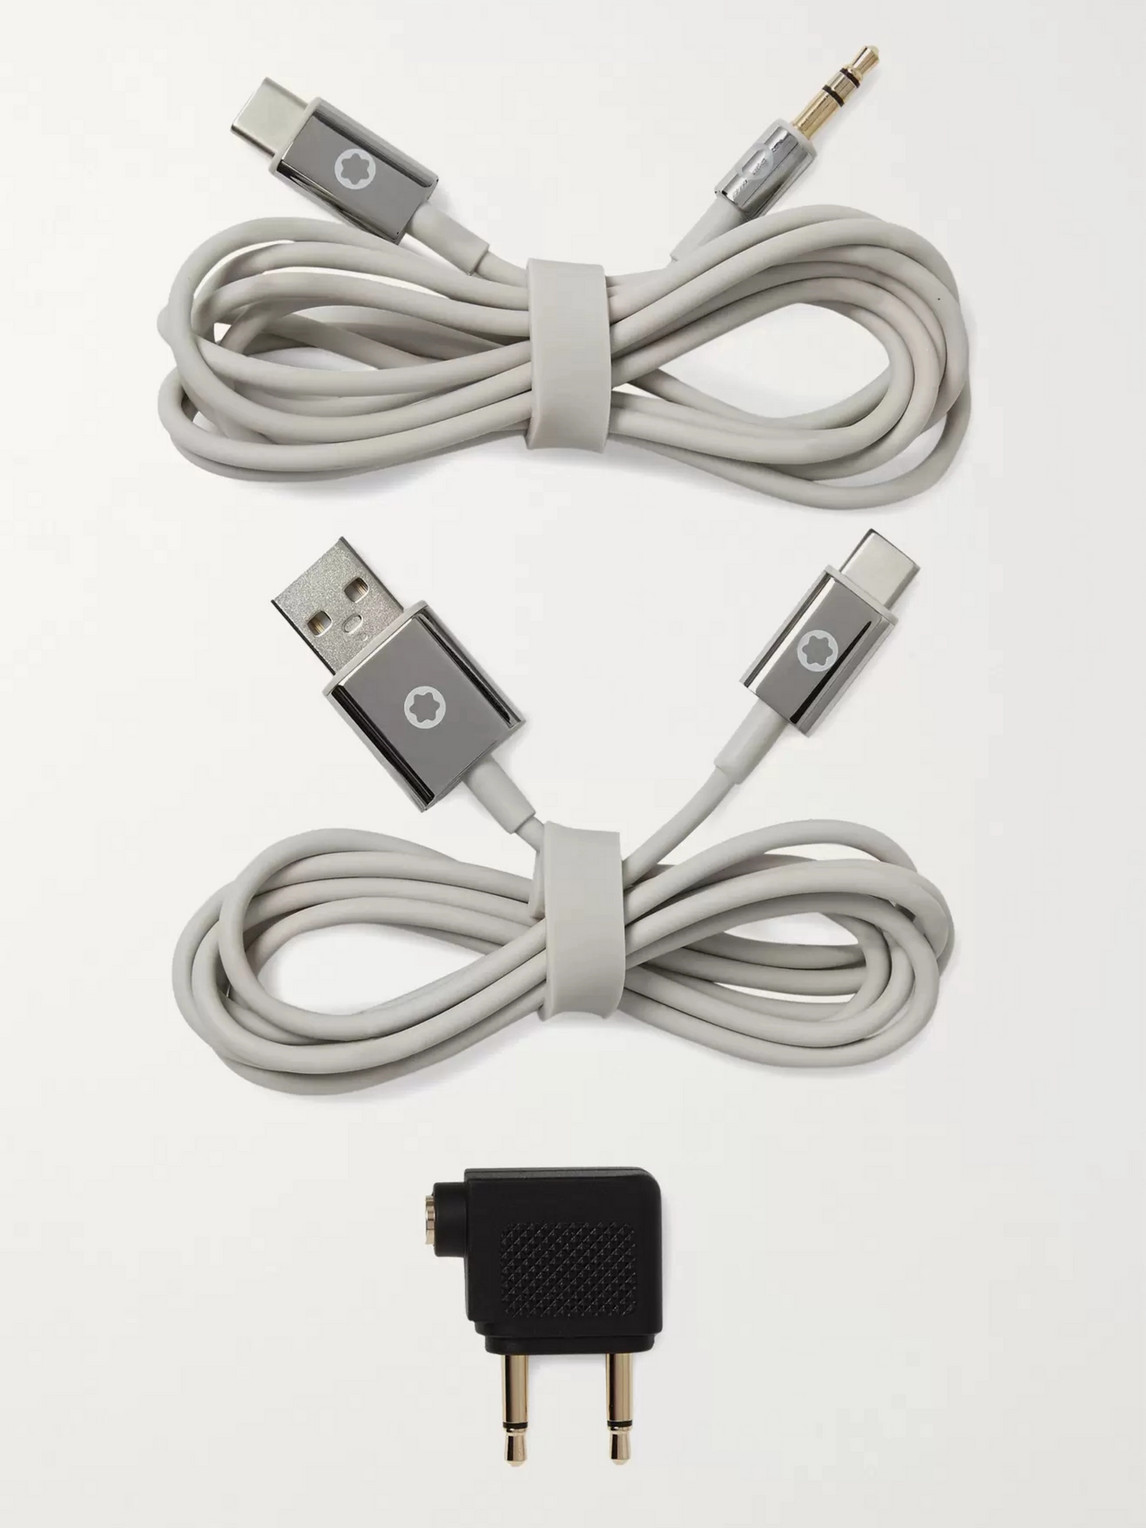 MB 01 Travel Charger and Cable Set